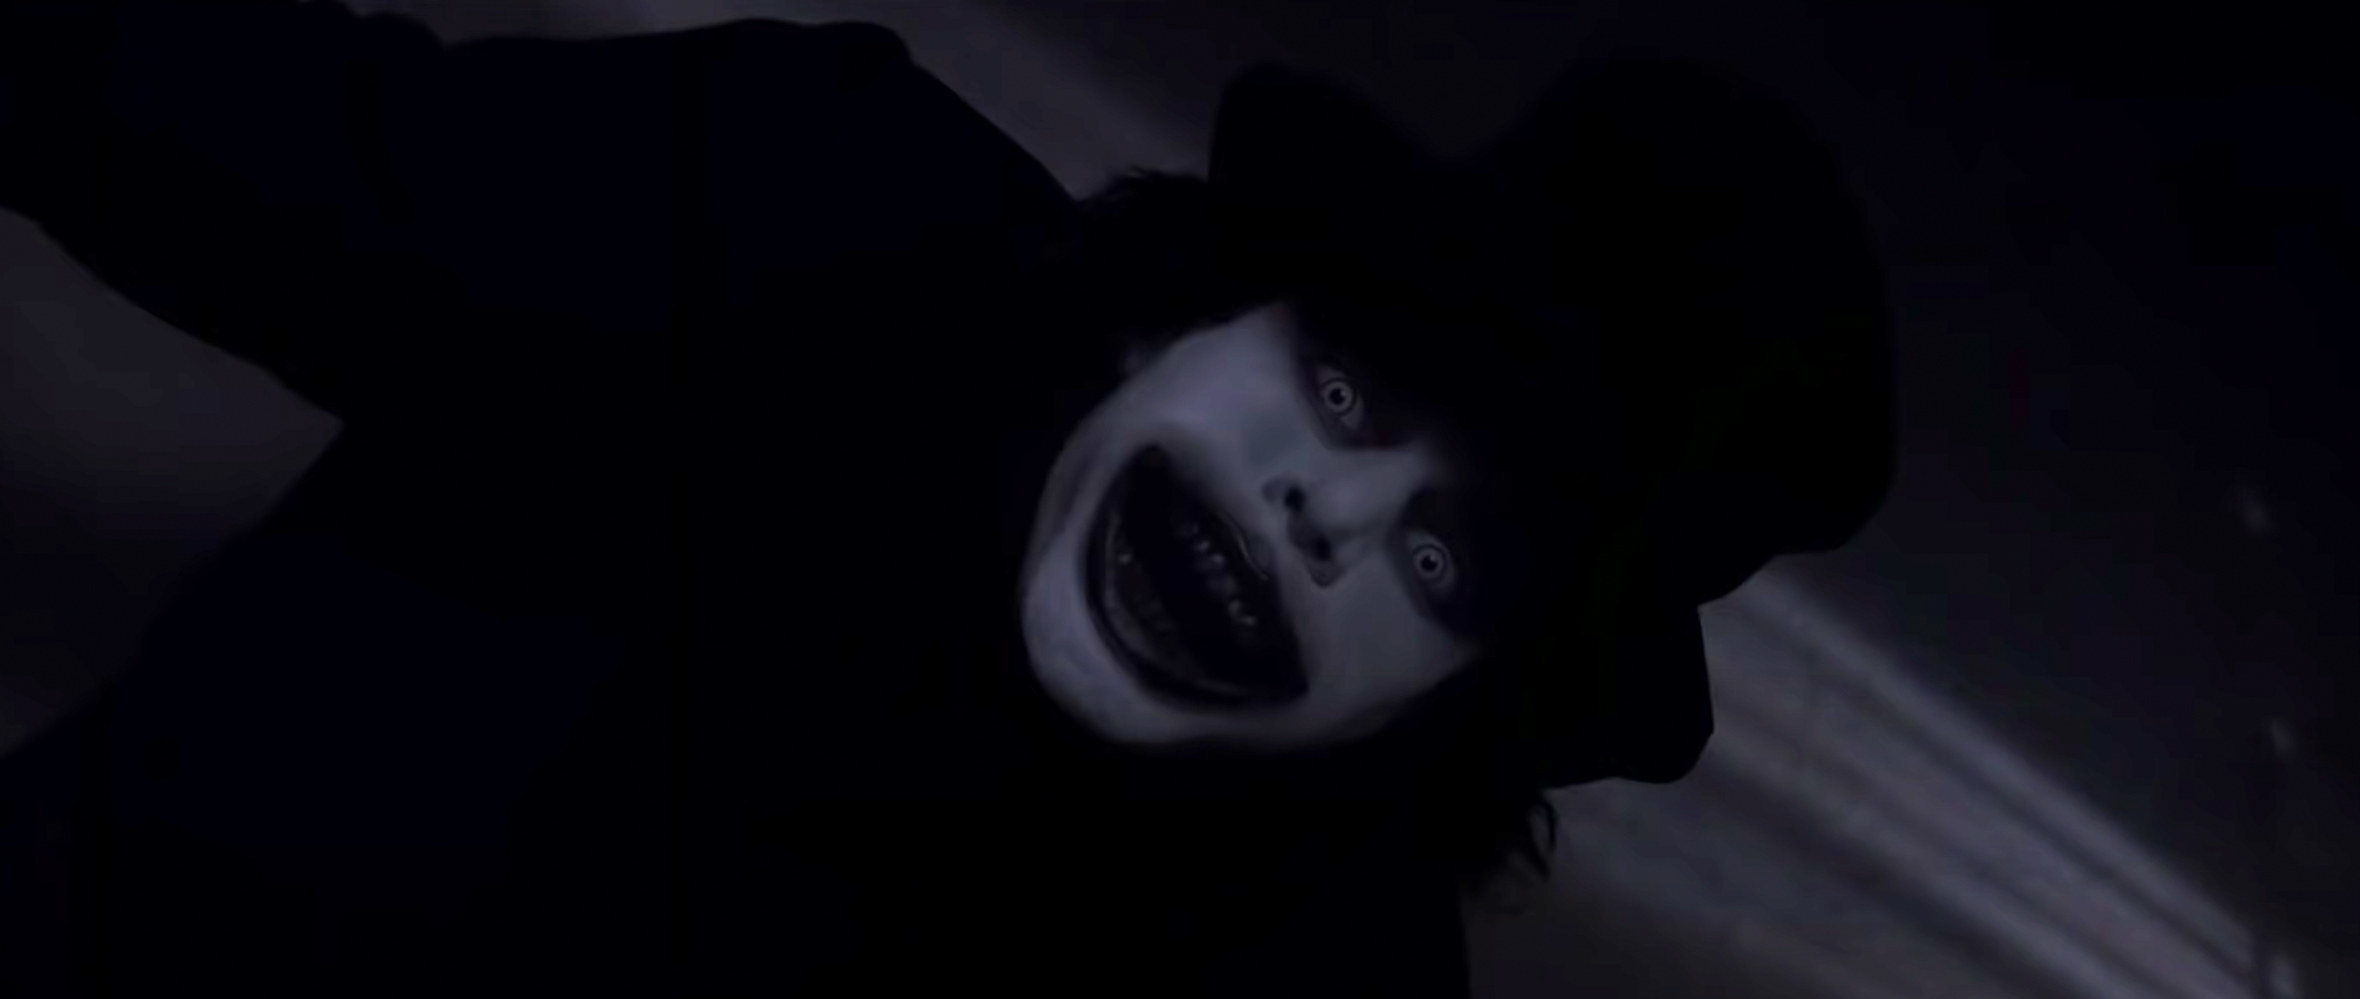 The Babadook, a dark figure in a top hat with a white face opens its mouth and widens its eerie-looking eyes